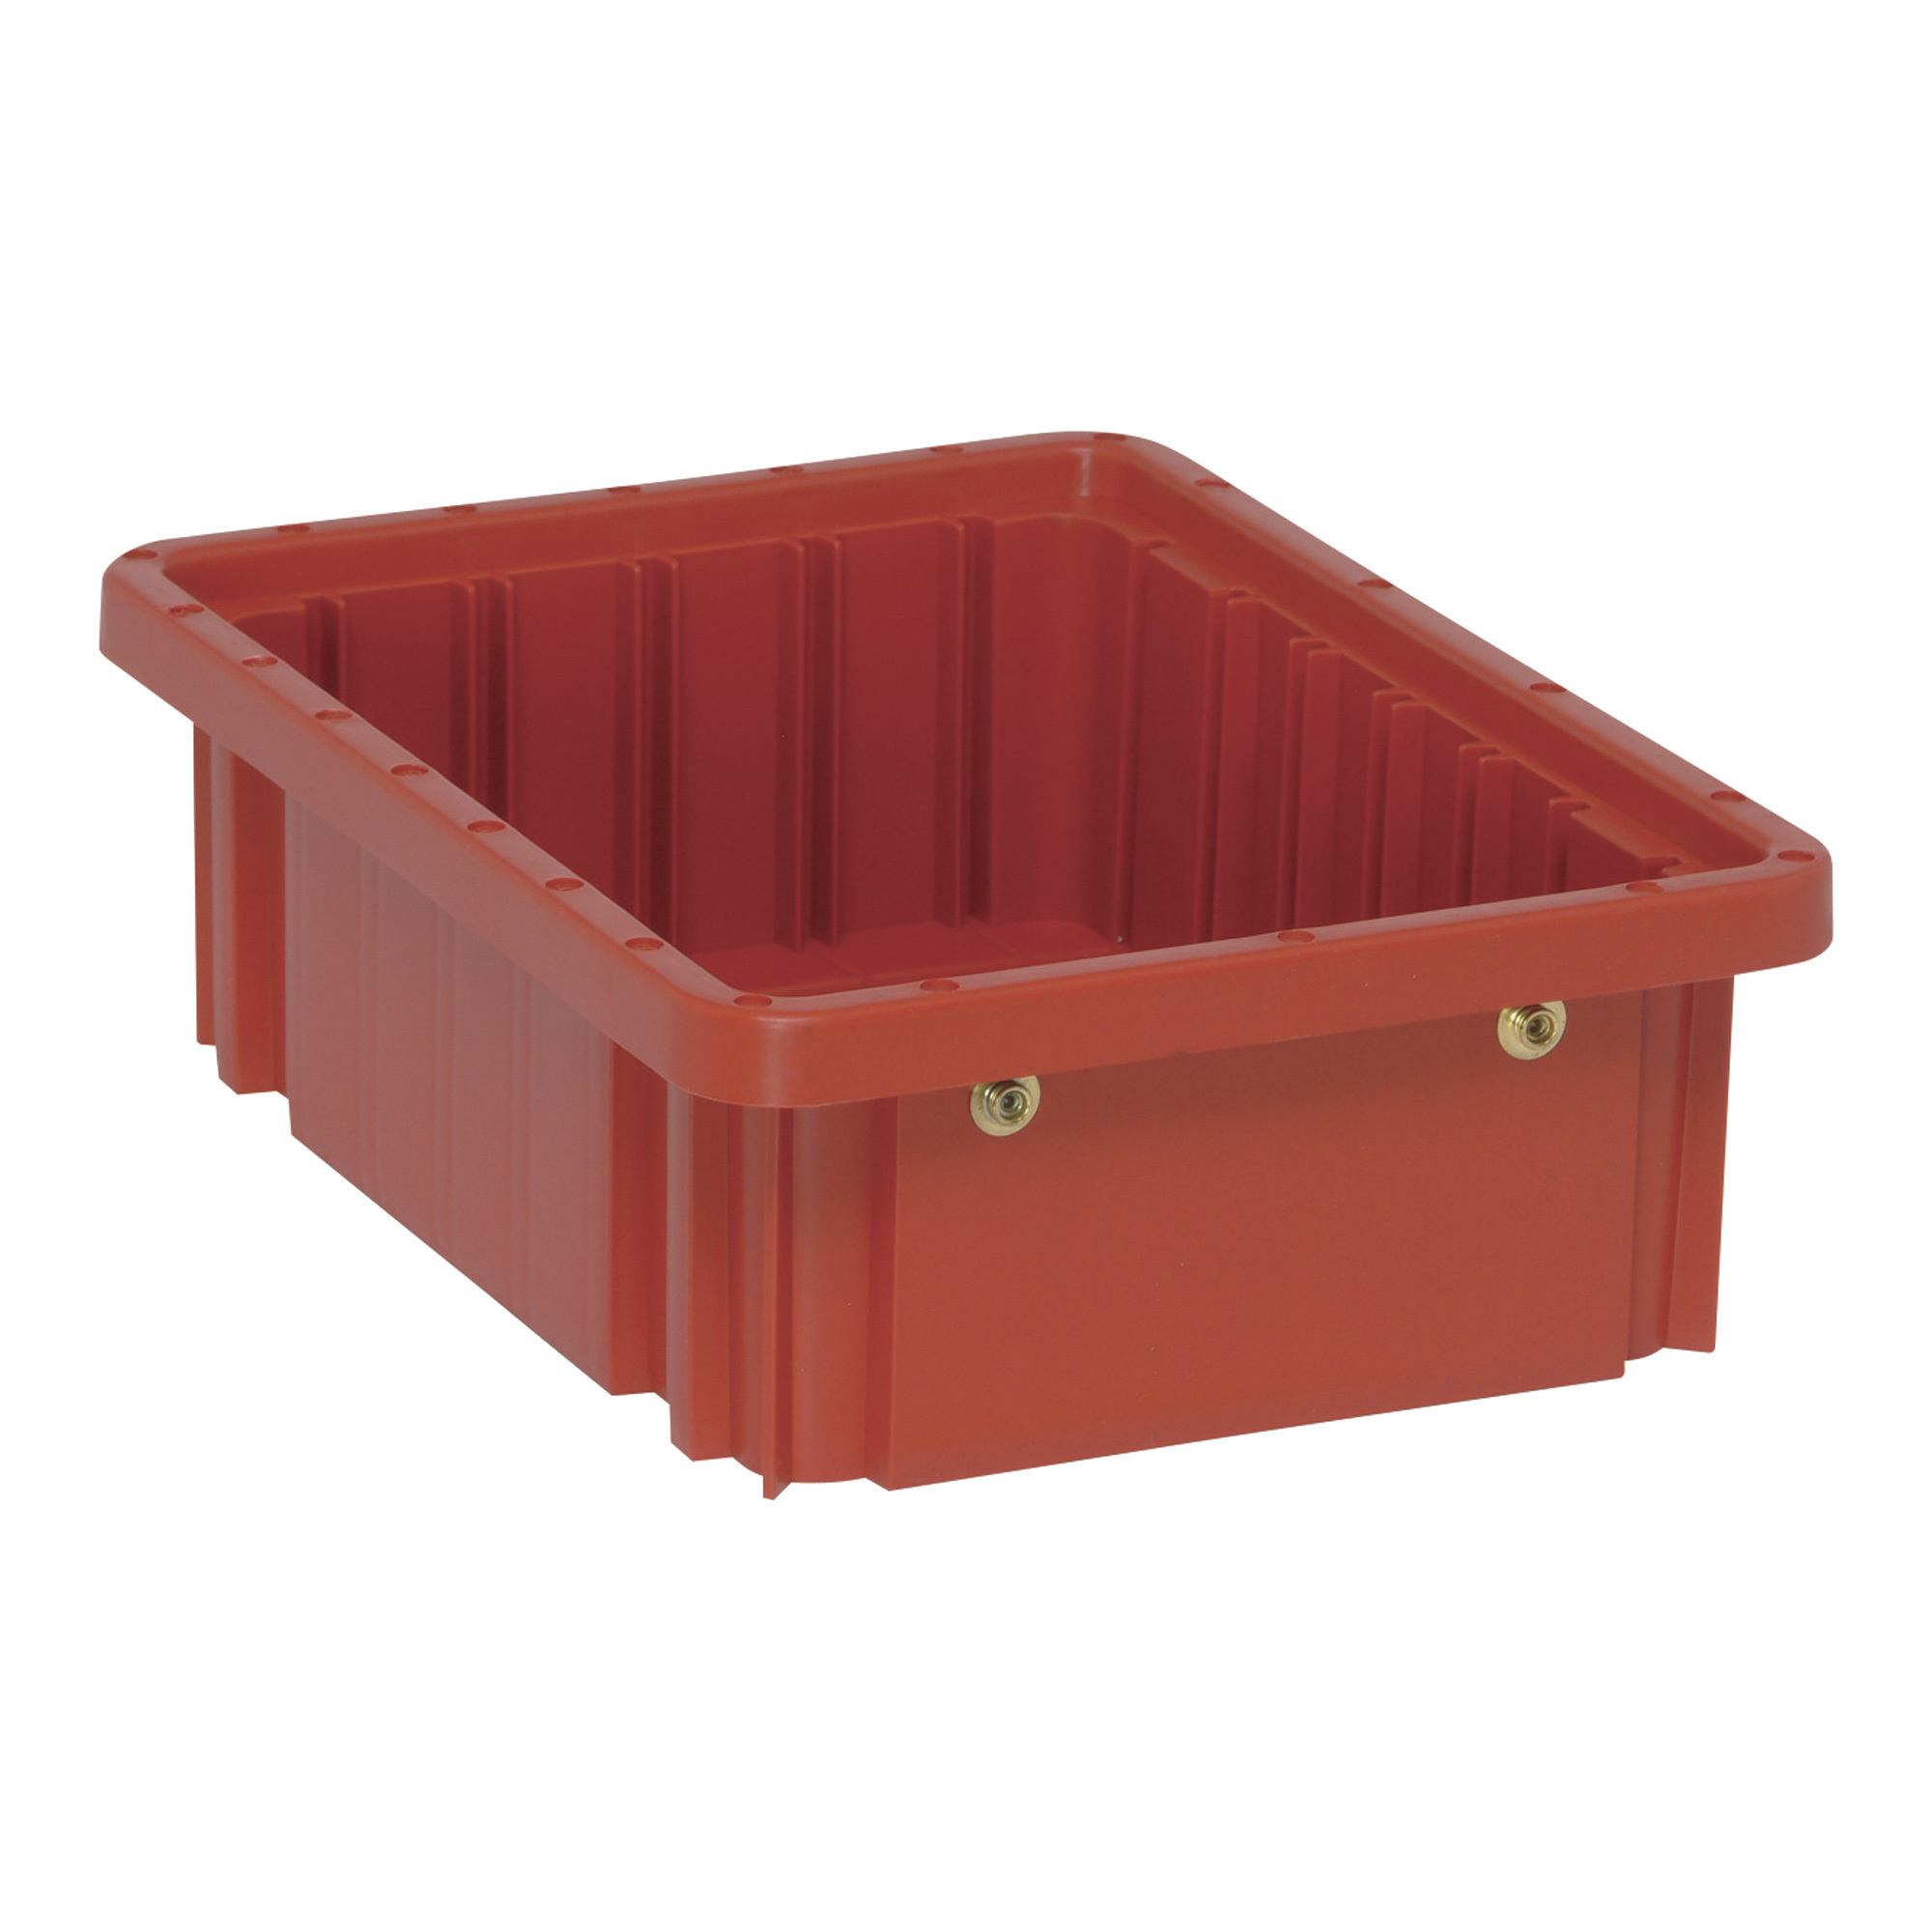 Quantum Storage Dividable Grid Container, 20-Pack, 10 7/8Inch L x 8 1/4Inch W x 3 1/2Inch H, Red, Model DG91035RD